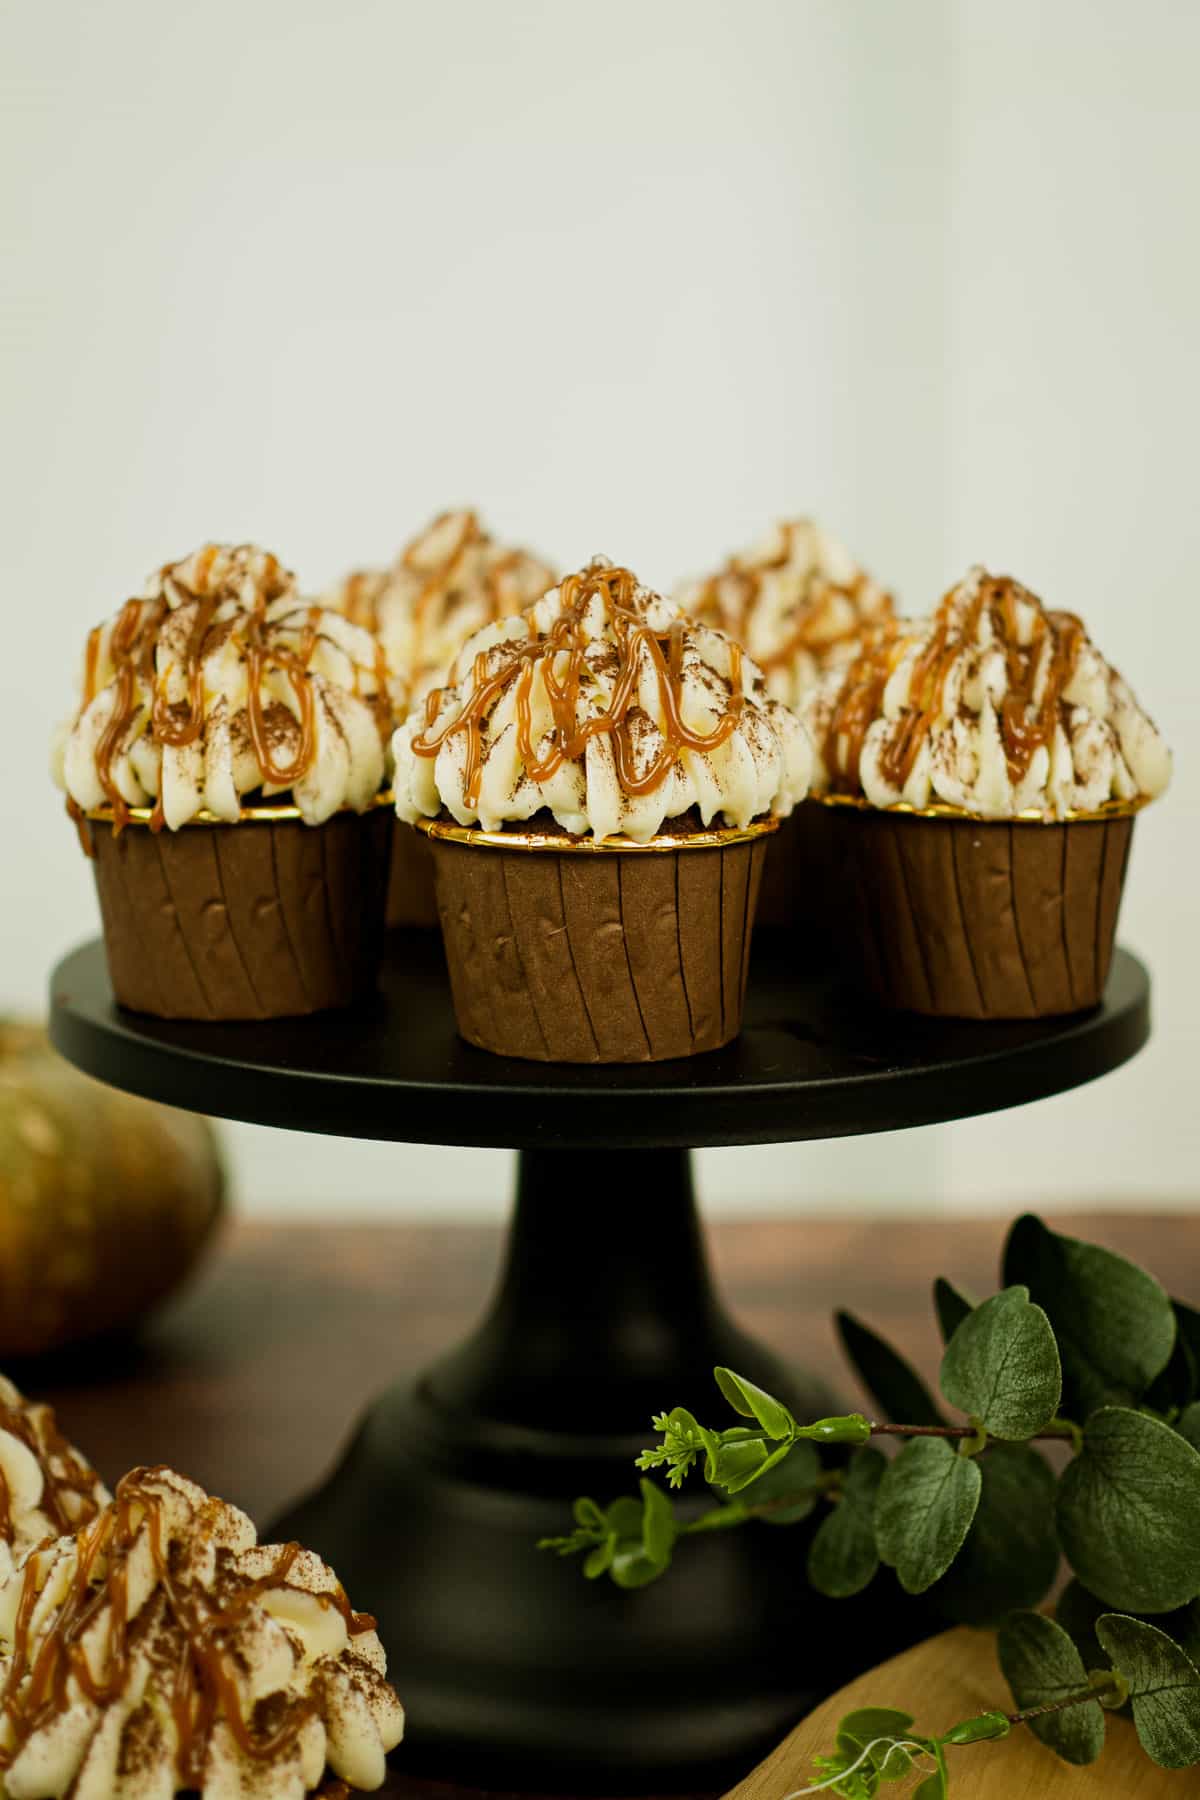 Cupcakes with caramel drizzle in brown muffin cups on a black cake stand.